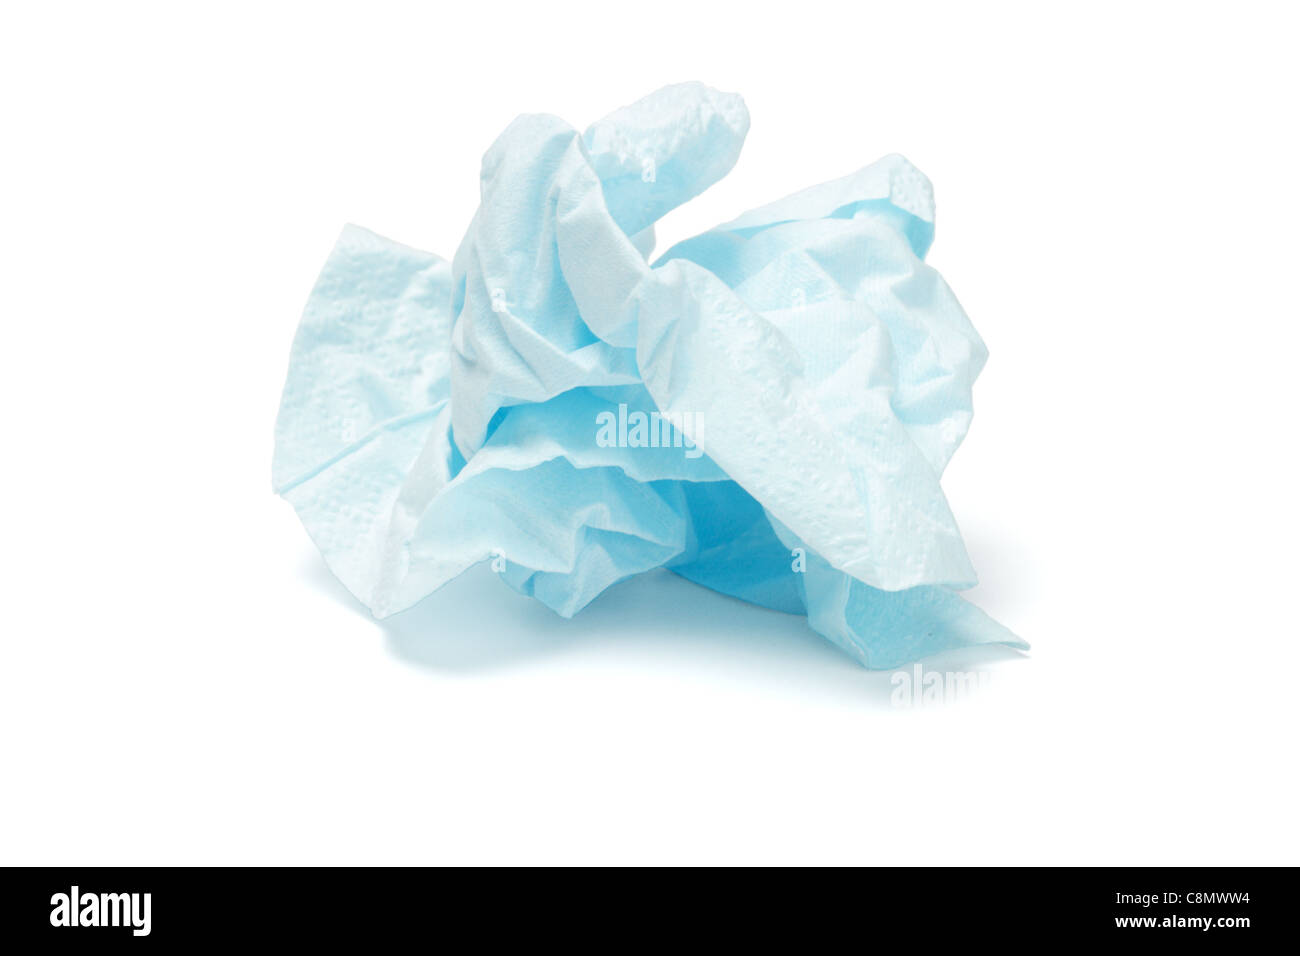 Crumpled blue facial tissue paper on white background Stock Photo